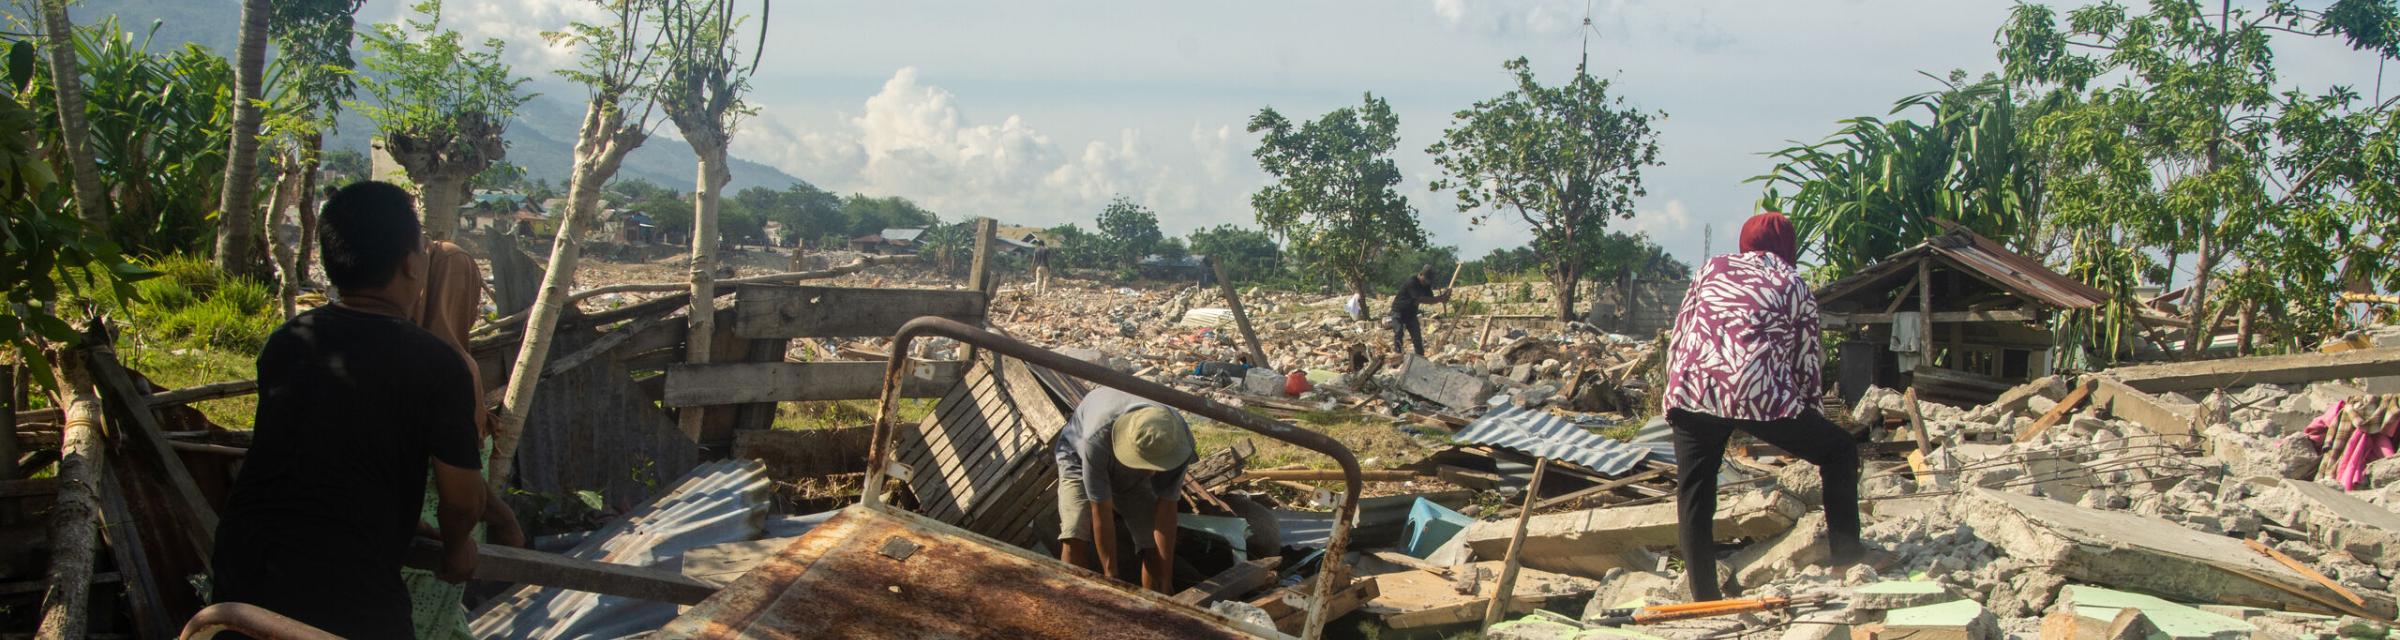 In 2018, an earthquake off the coast of Indonesia caused a tsunami that wreaked havoc on the coastline. The city of Palu was the worst hit. Families had to sort through piles of their things that had been swept away or damaged. Photo by Ellyn Schellenberg